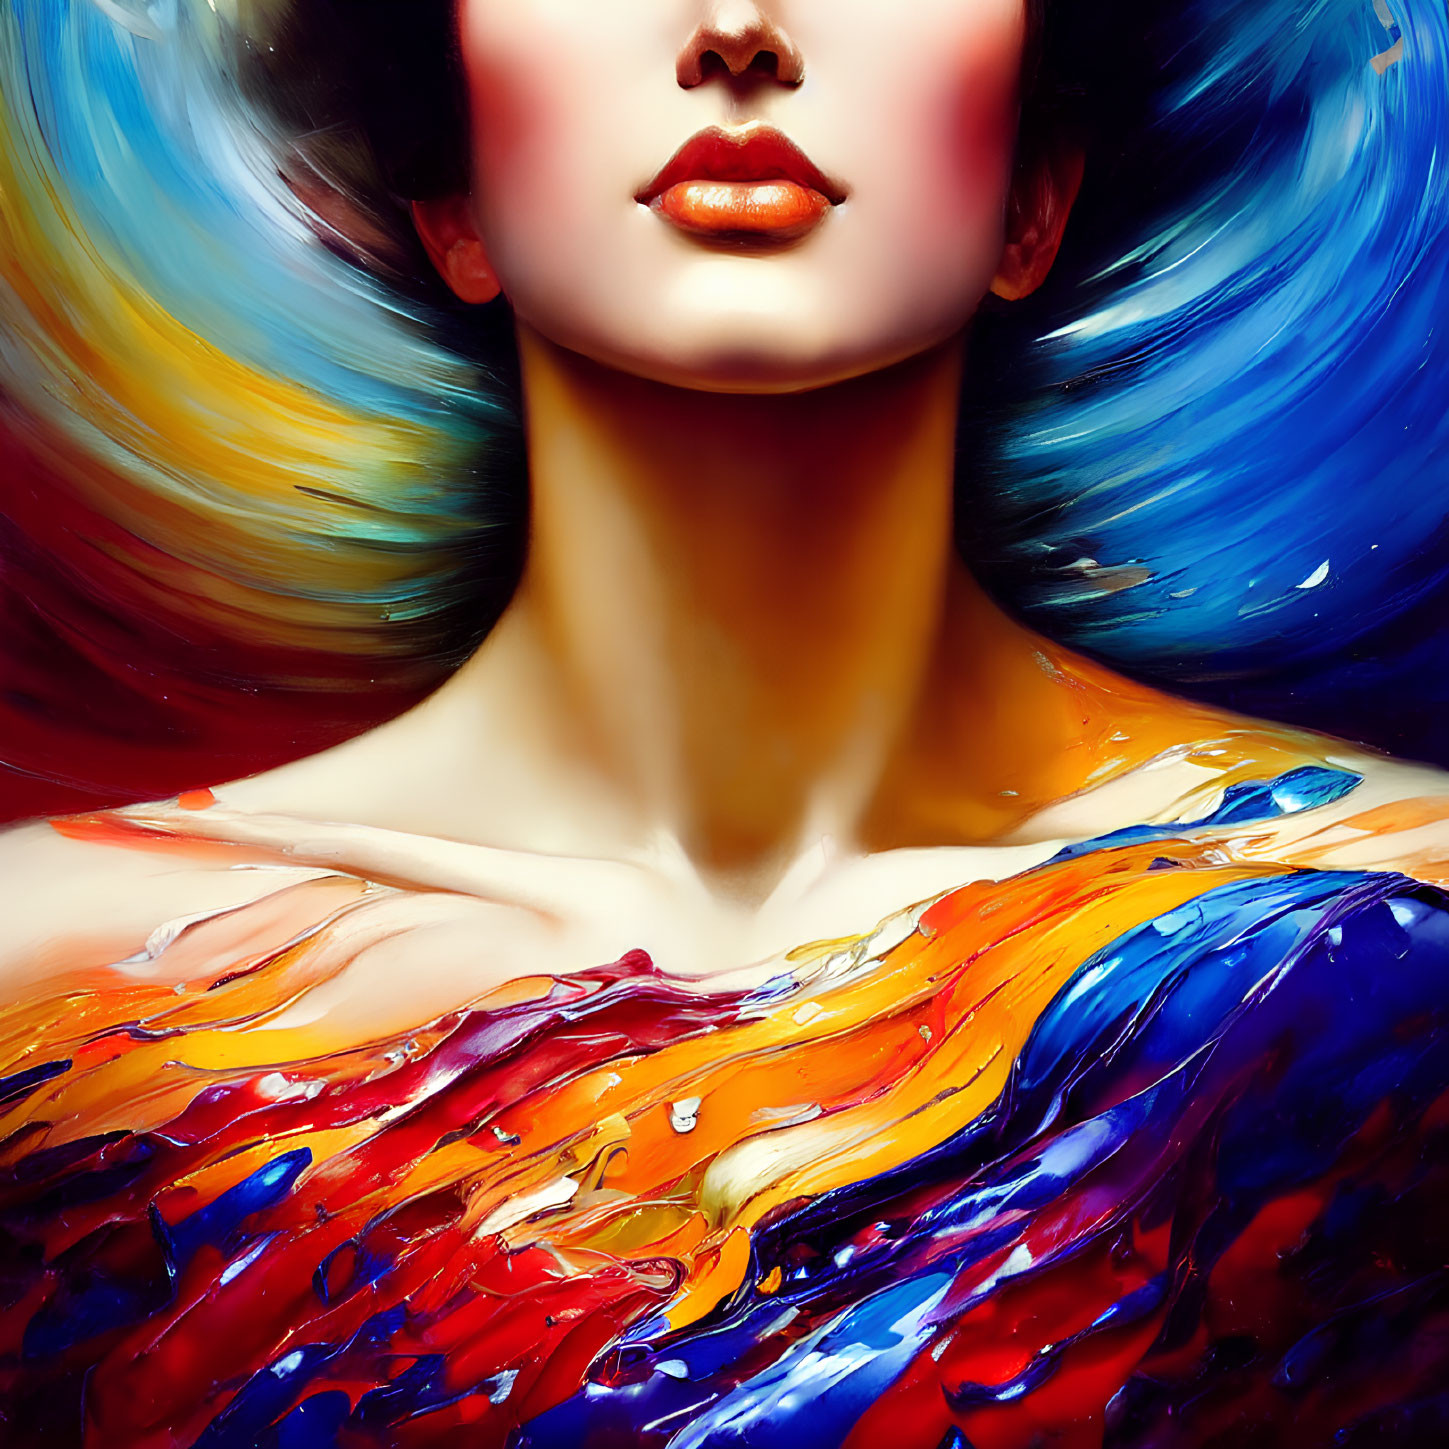 Colorful swirling textures surround woman's portrait